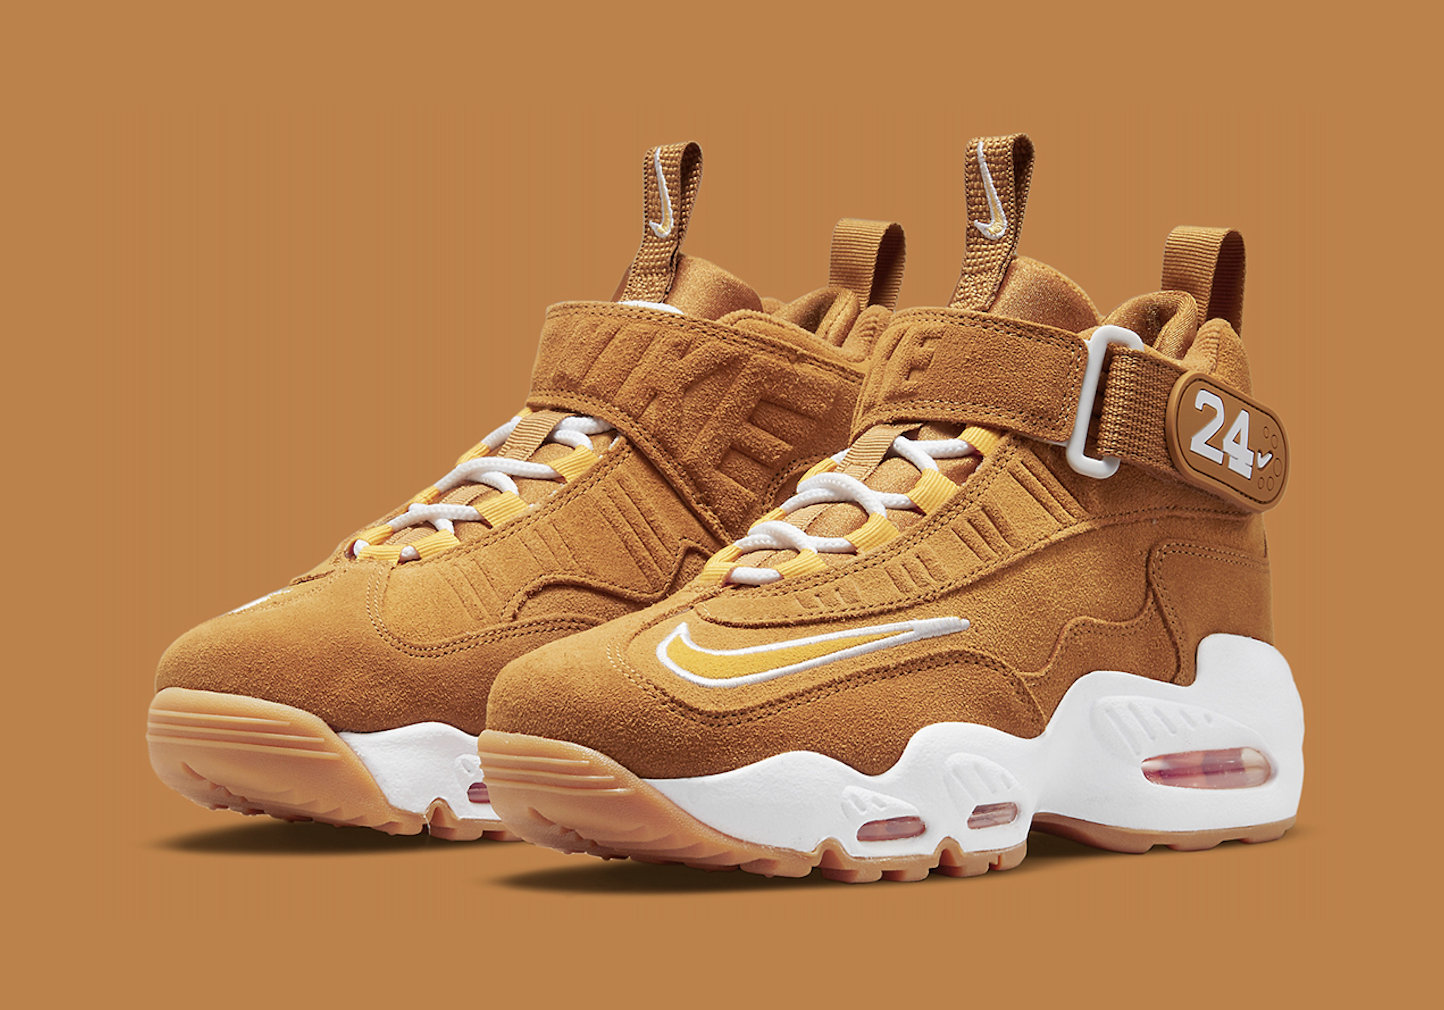 nike air griffey max 1 gold and black